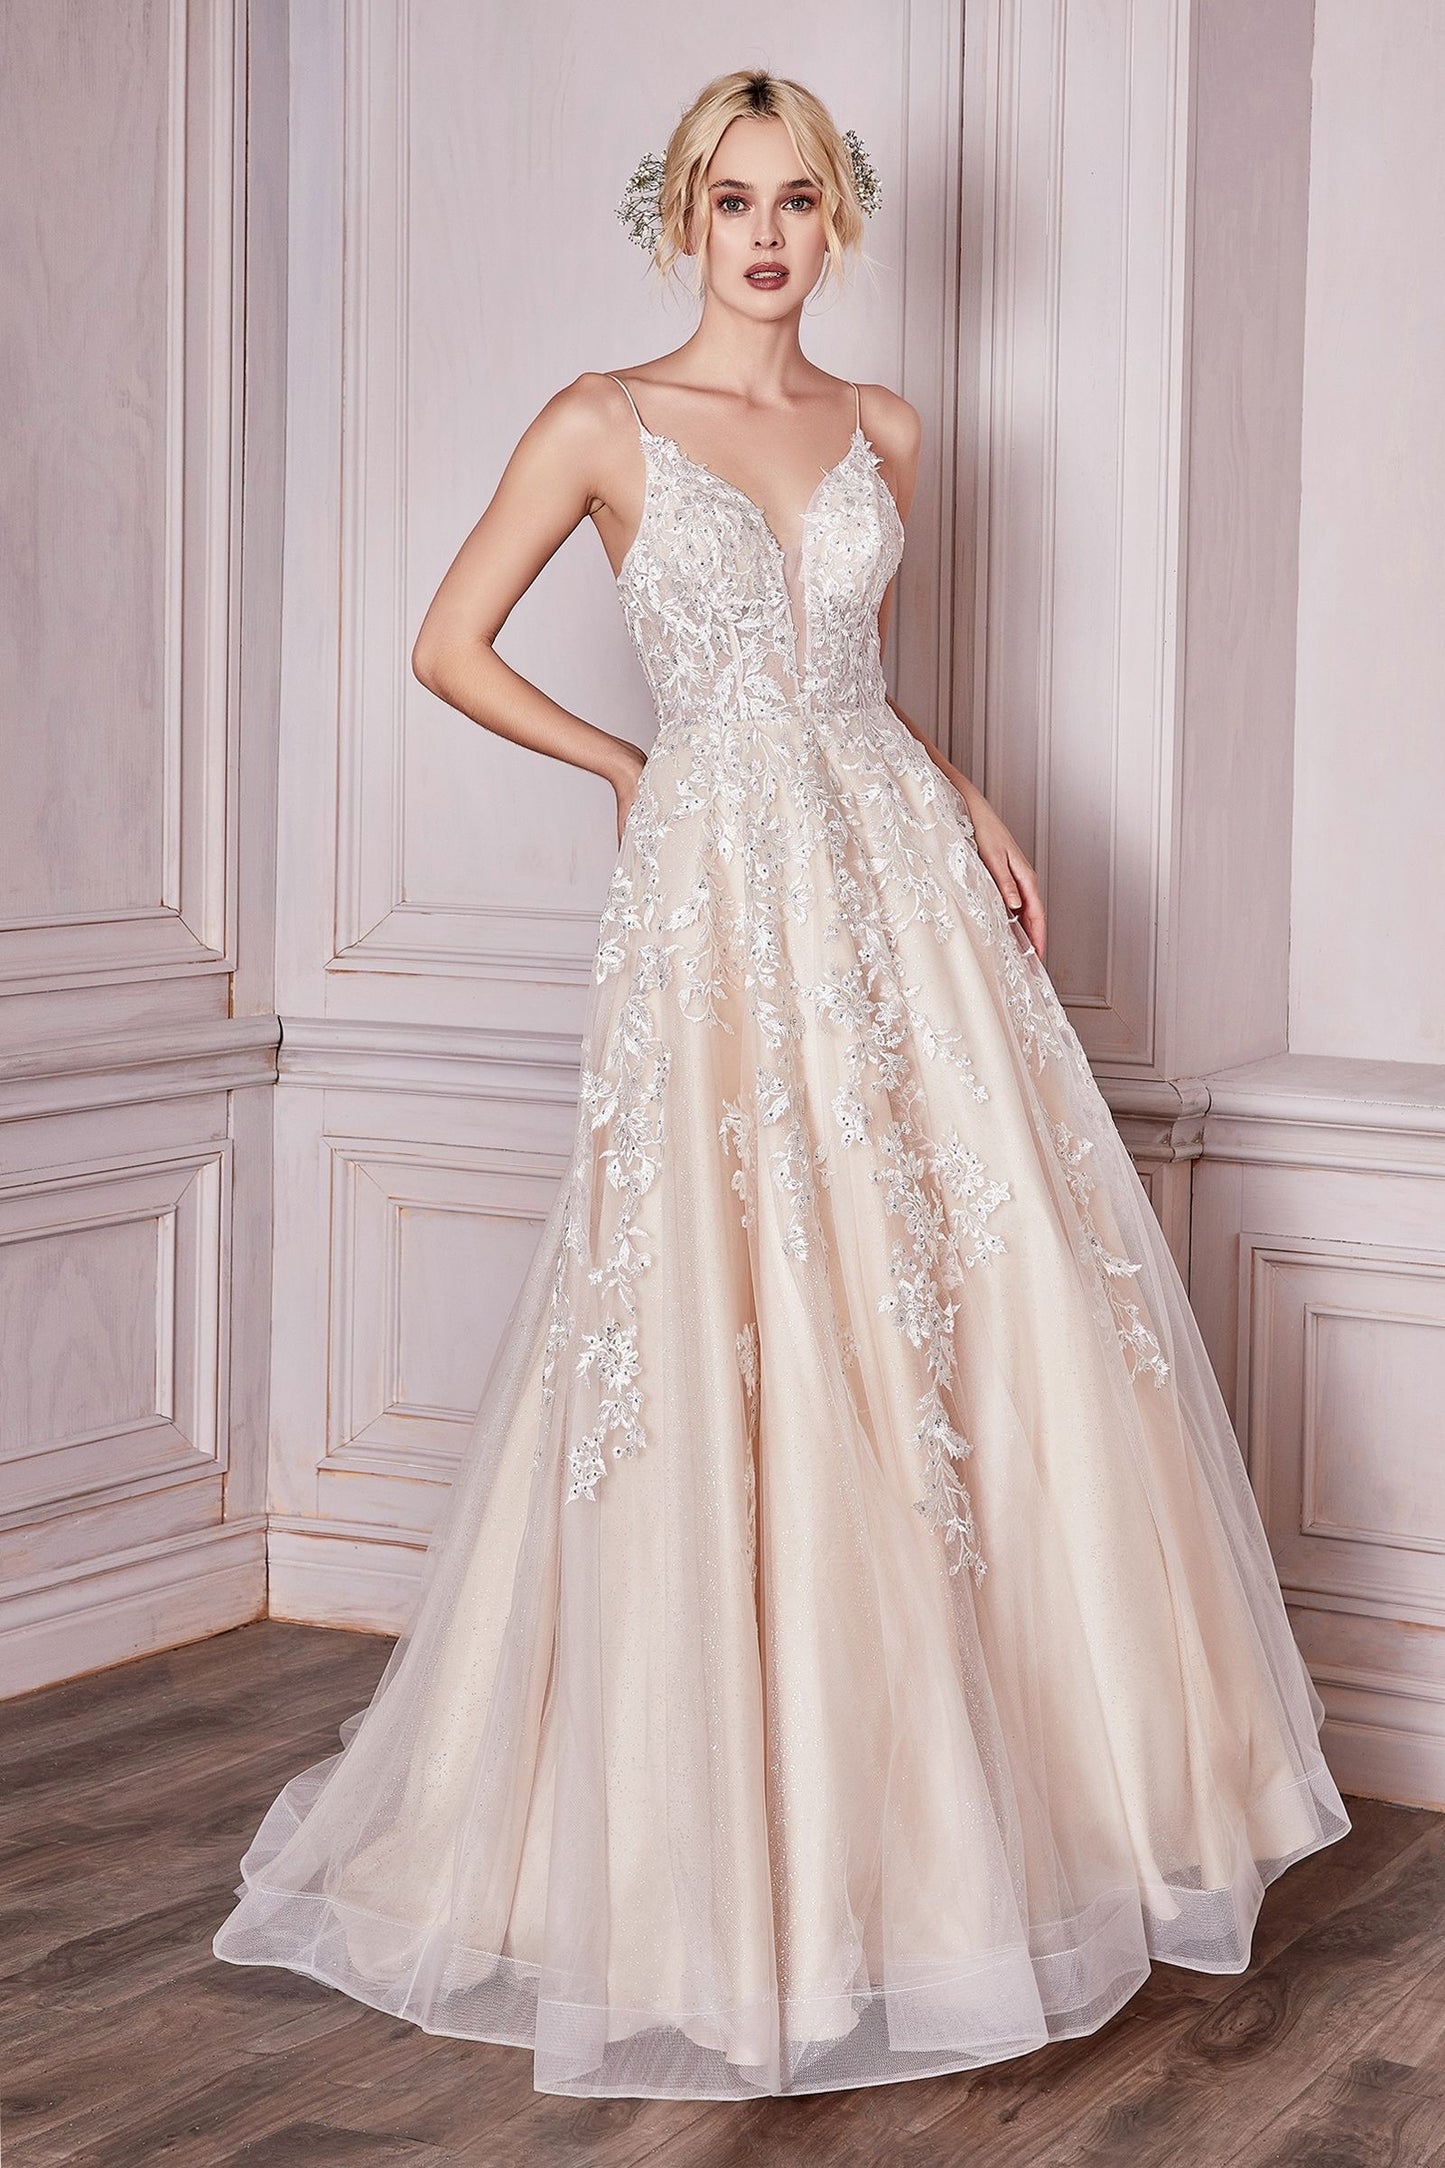 classic ball gown wedding dress with plunging neckline and intricate lace details